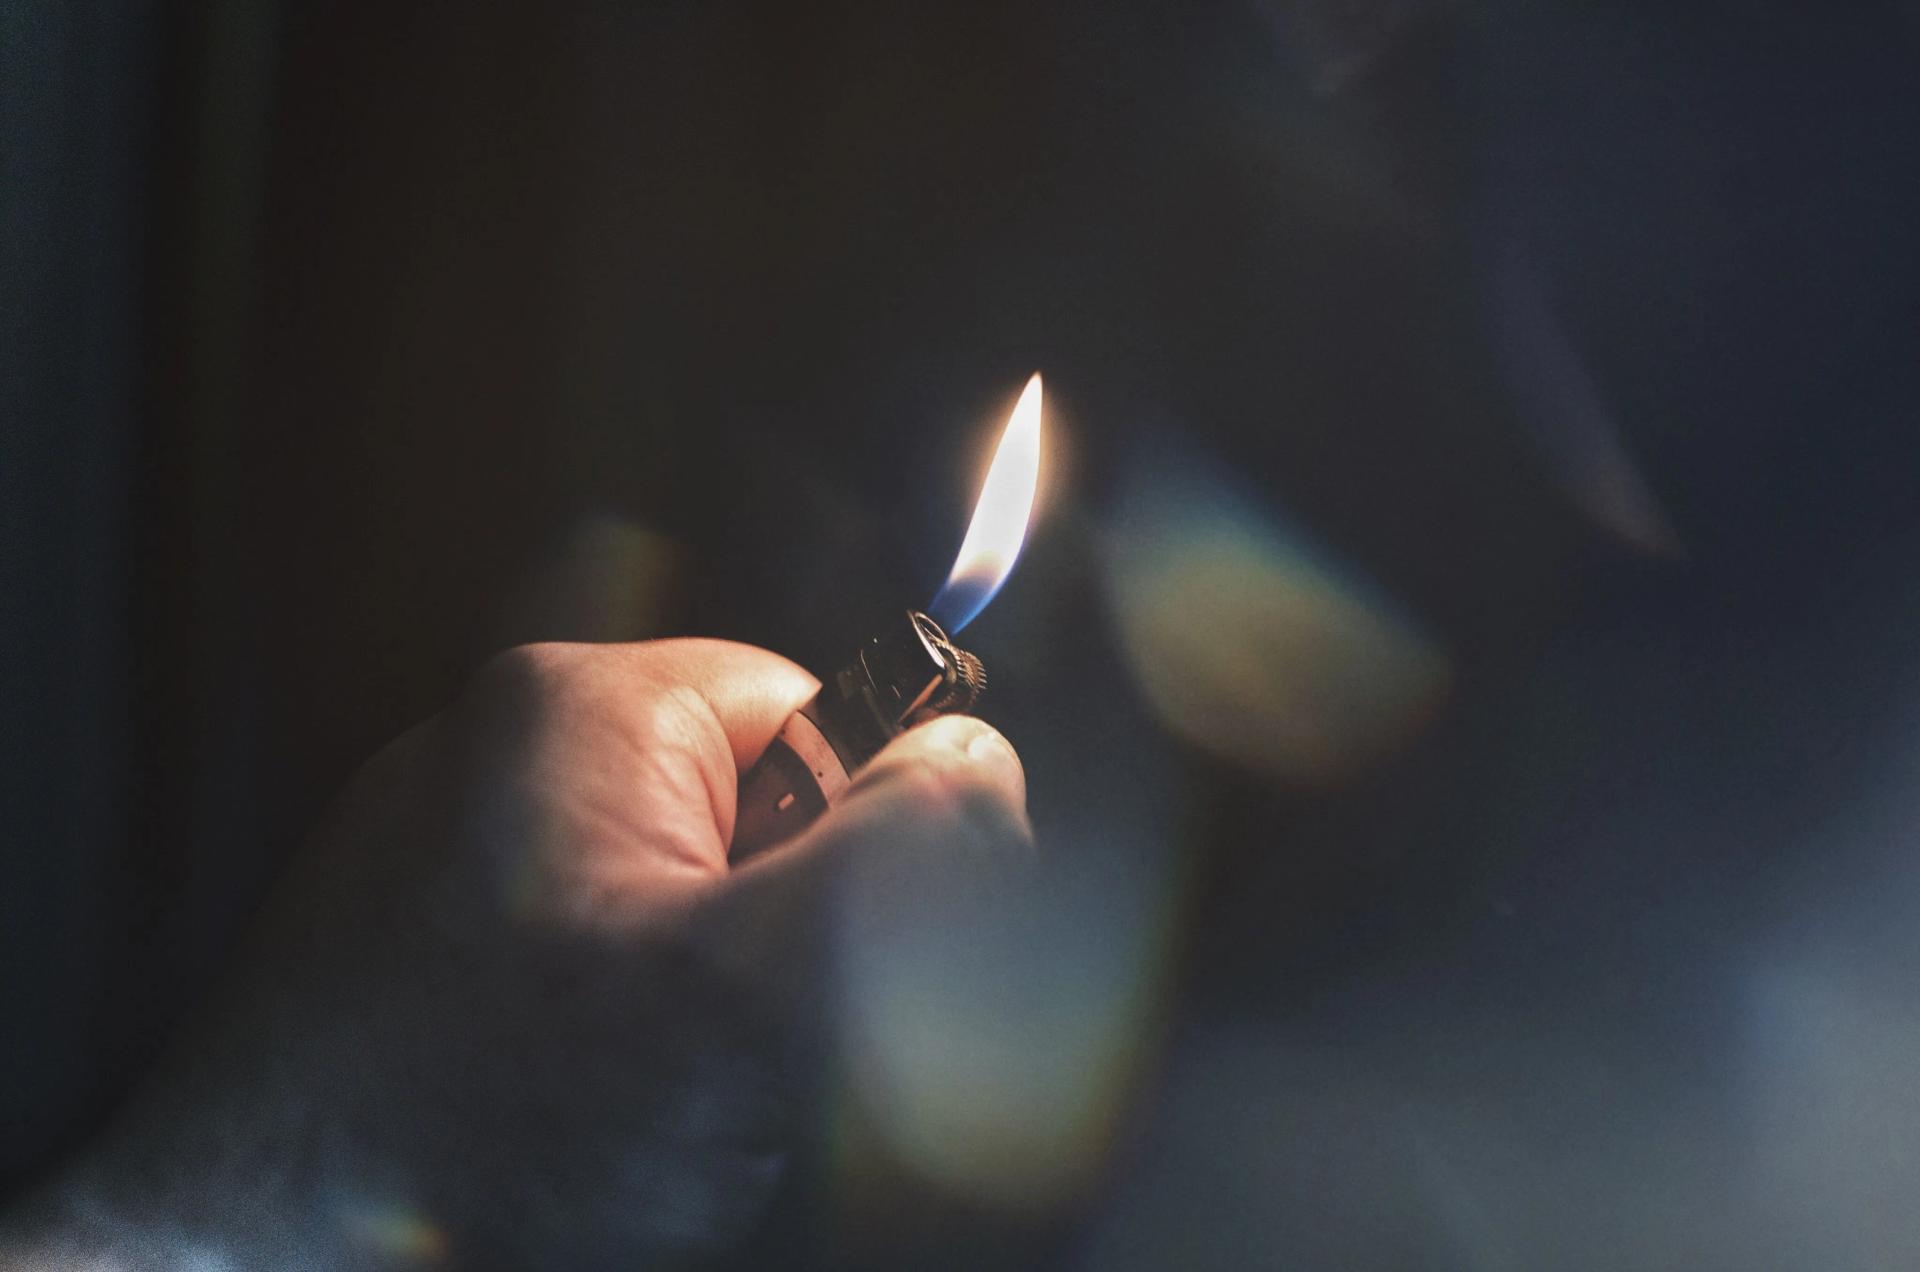 Lighter in the Hand